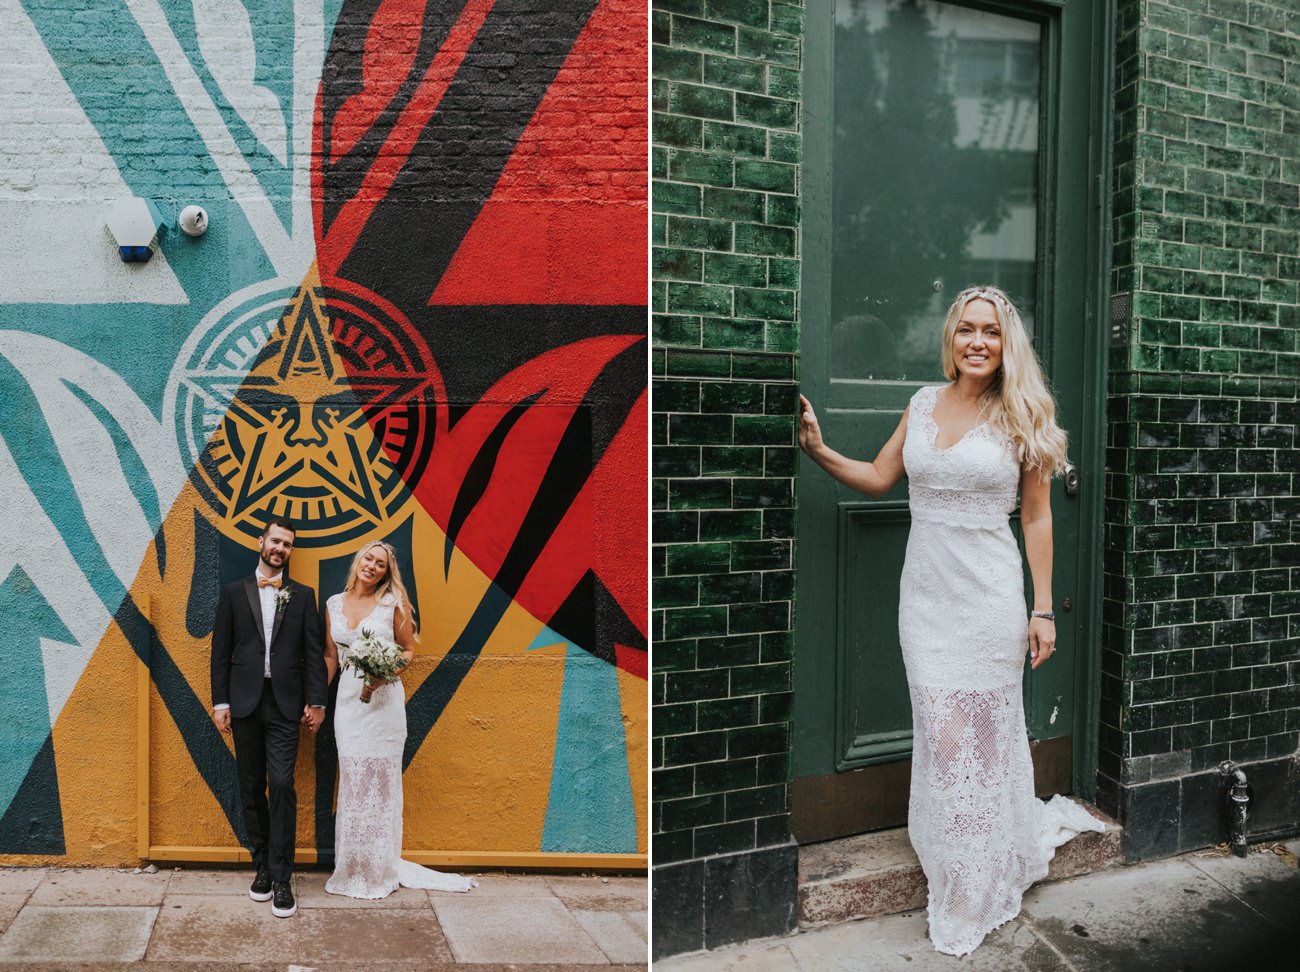 Beautiful Bride and street art London Micro Wedding Hackney Town Hall Bride and groom Portraits in arty Shoreditch Alterntive Wedding Photographer We Heart Pictures